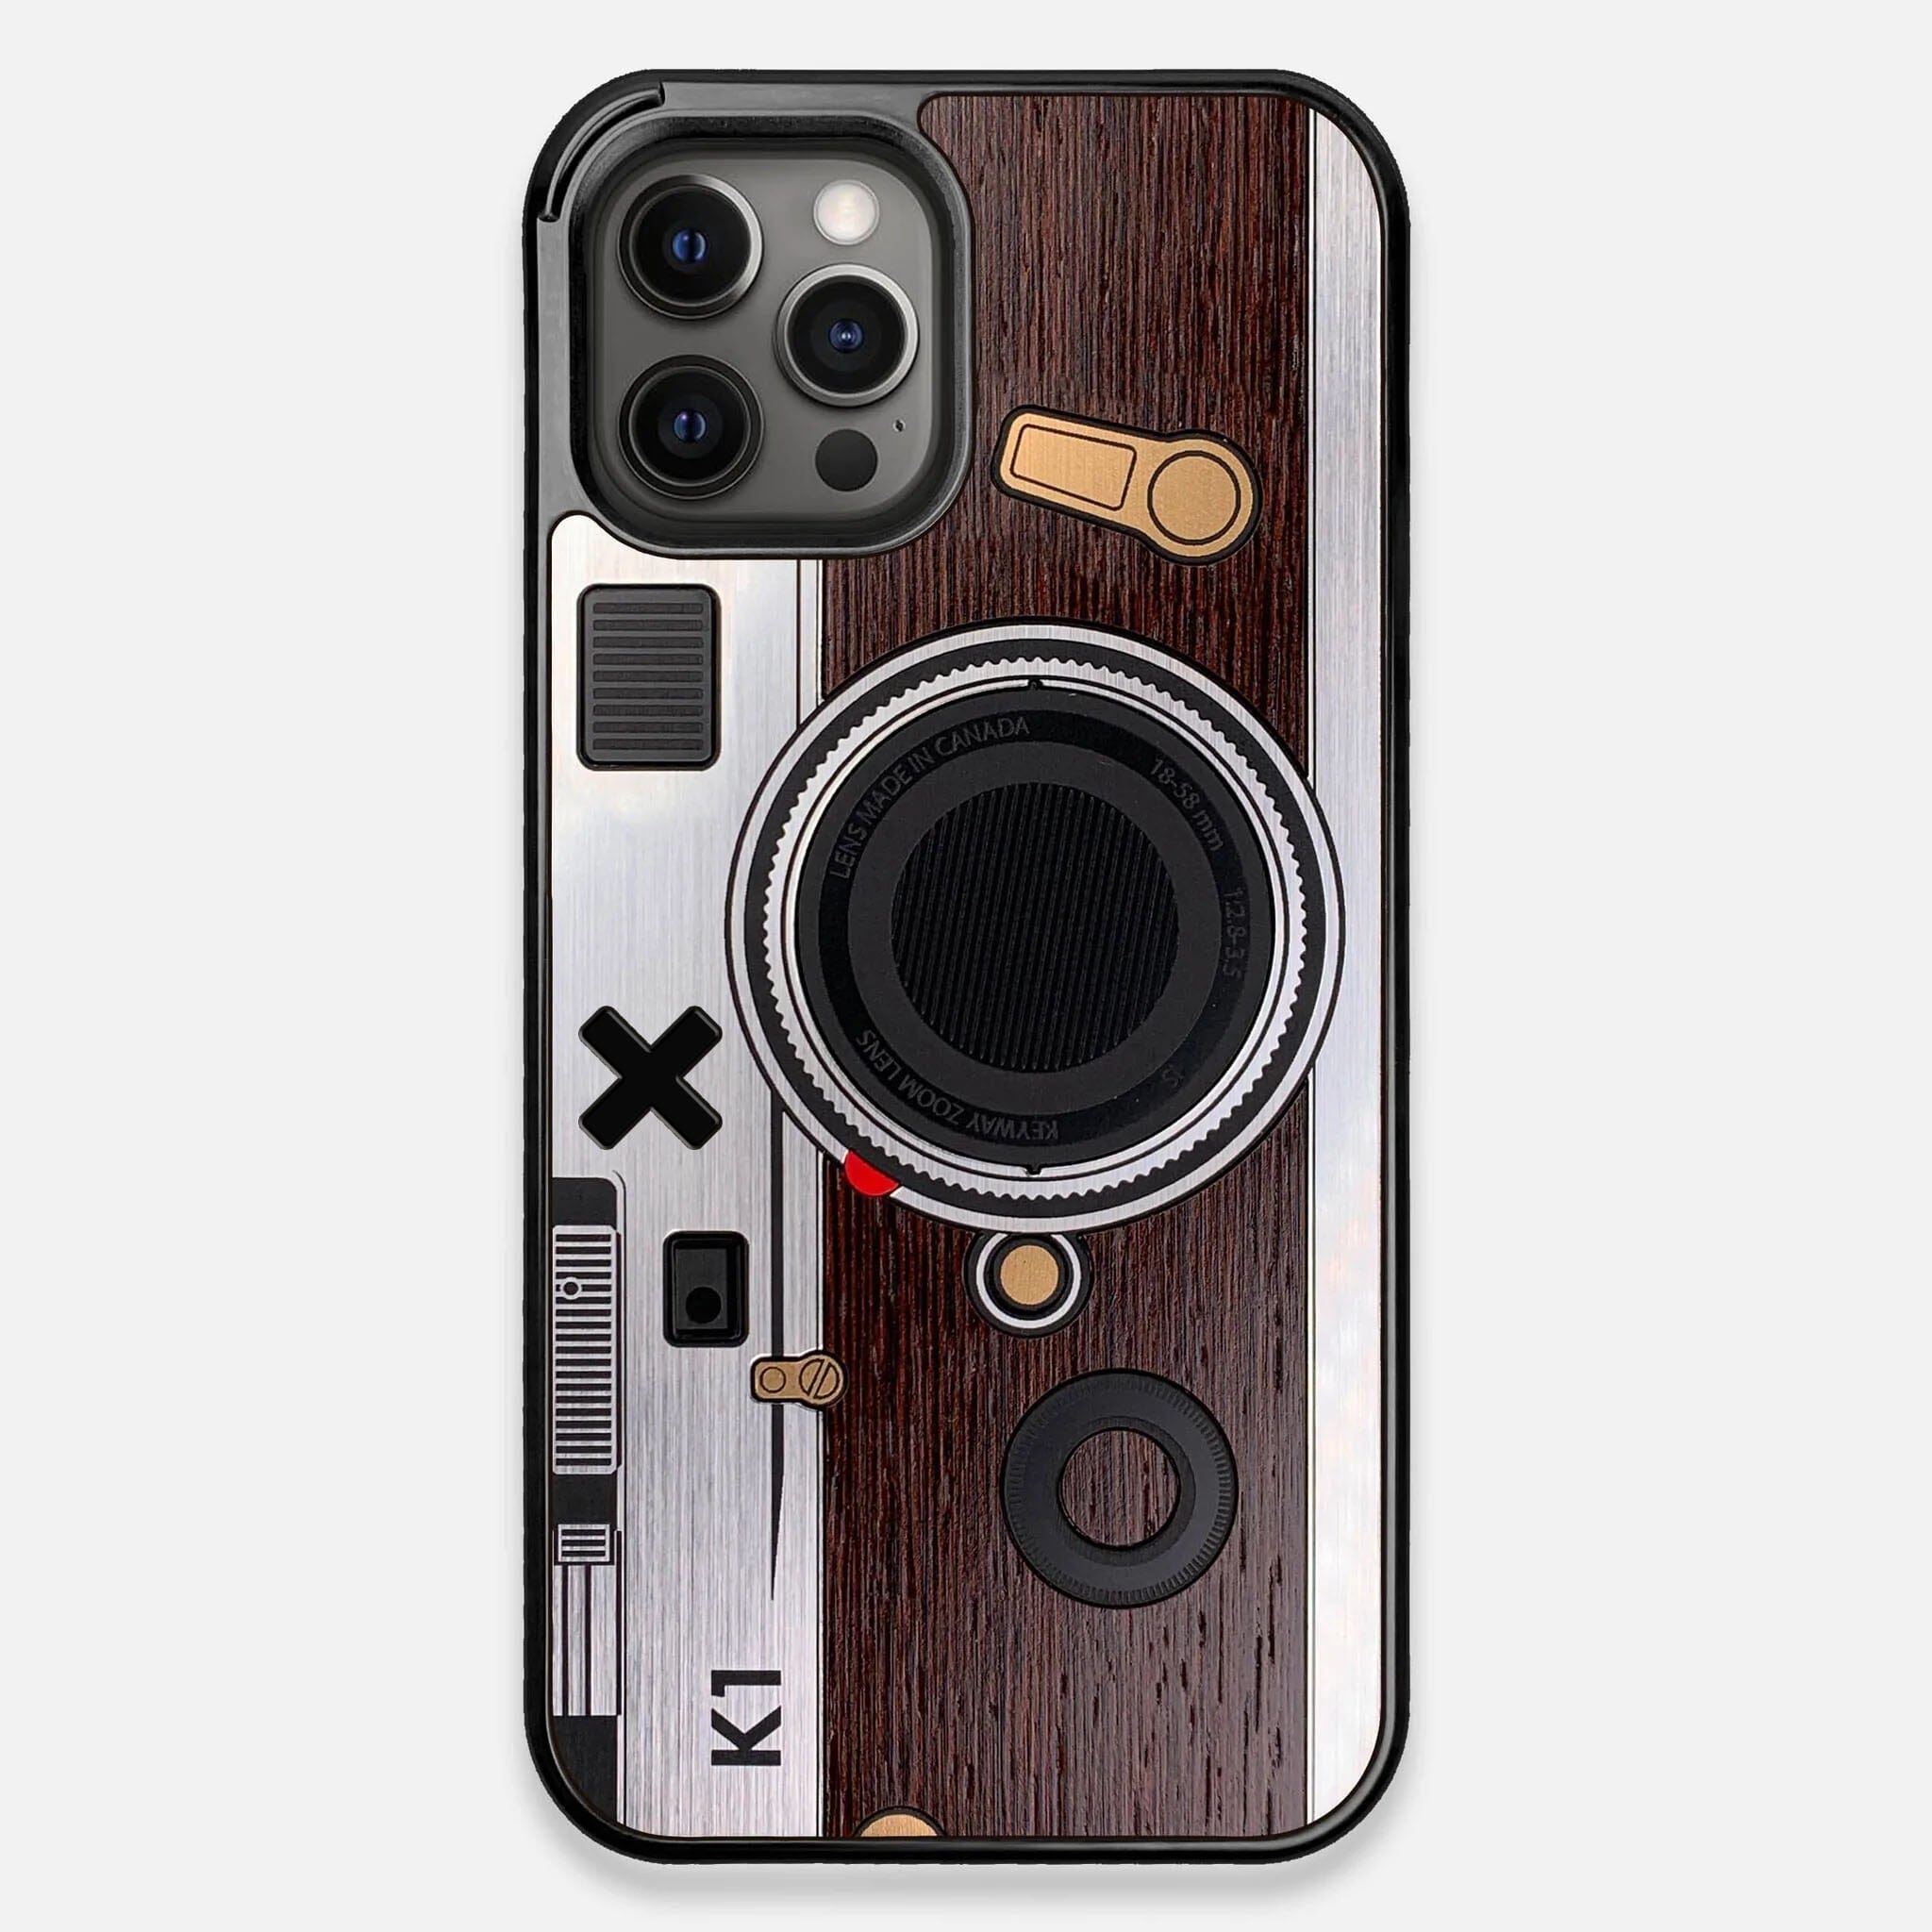 Front view of the Model K1 Camera iPhone 12 Pro Max Case by Keyway Designs